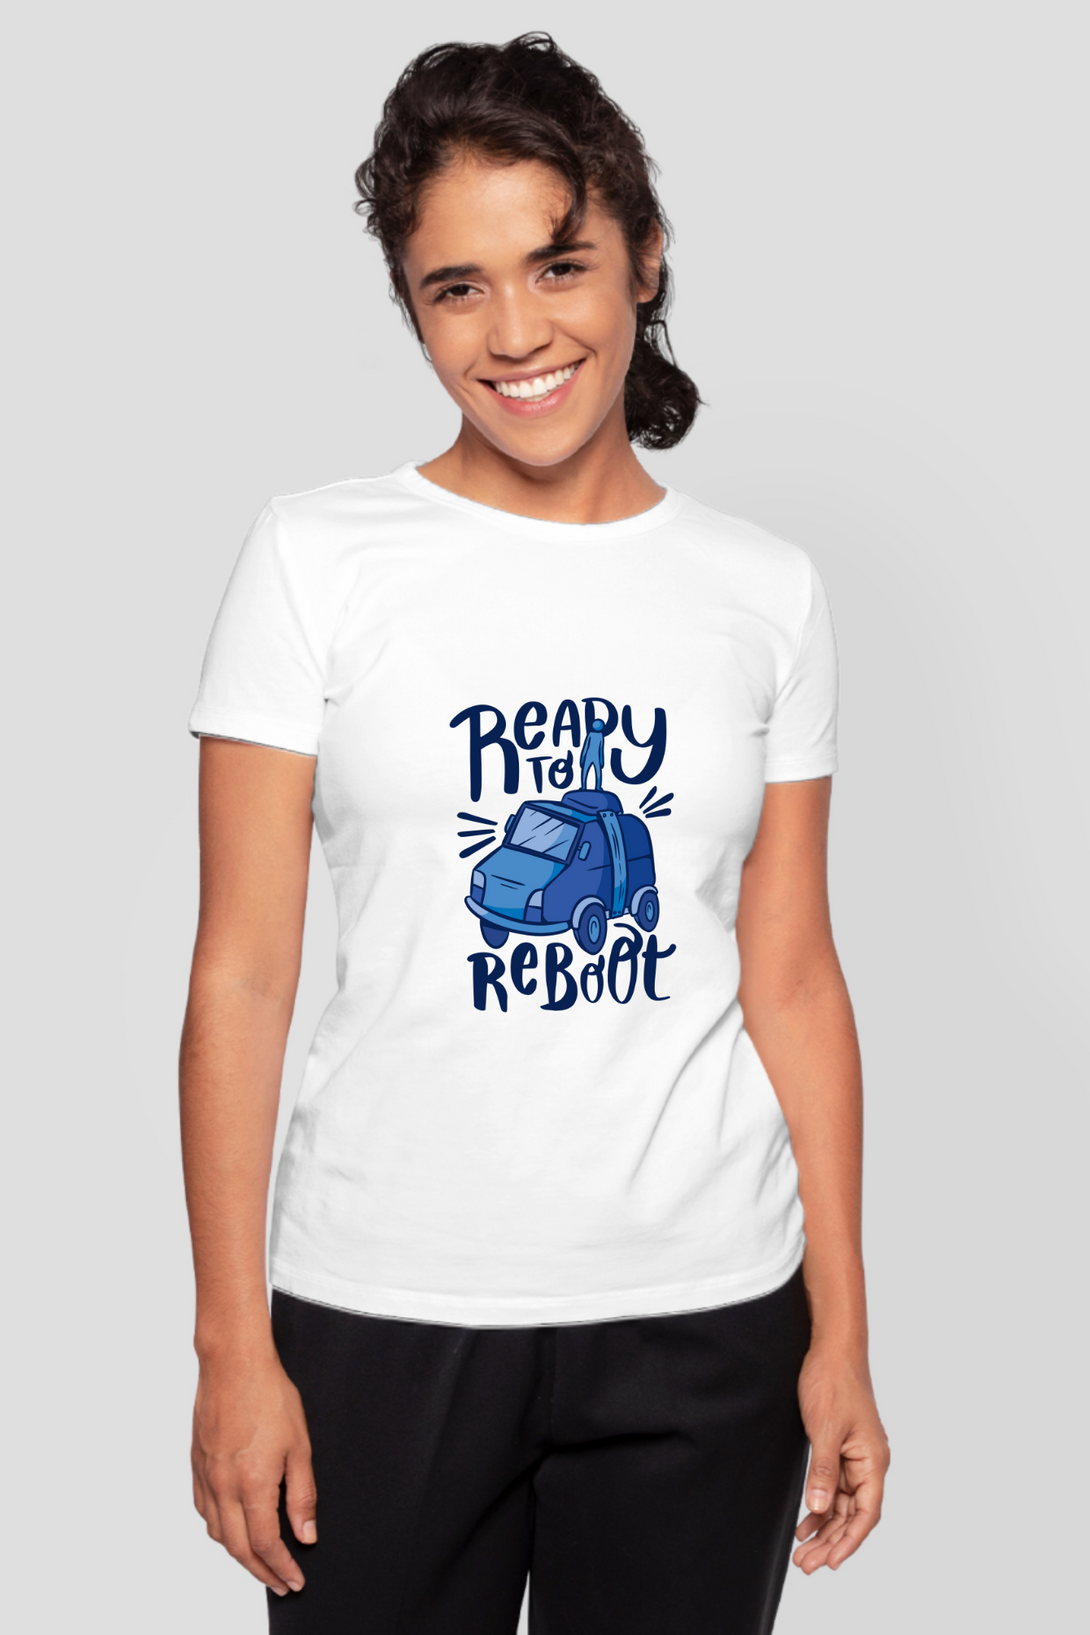 Ready To Reboot Printed T-Shirt For Women - WowWaves - 11